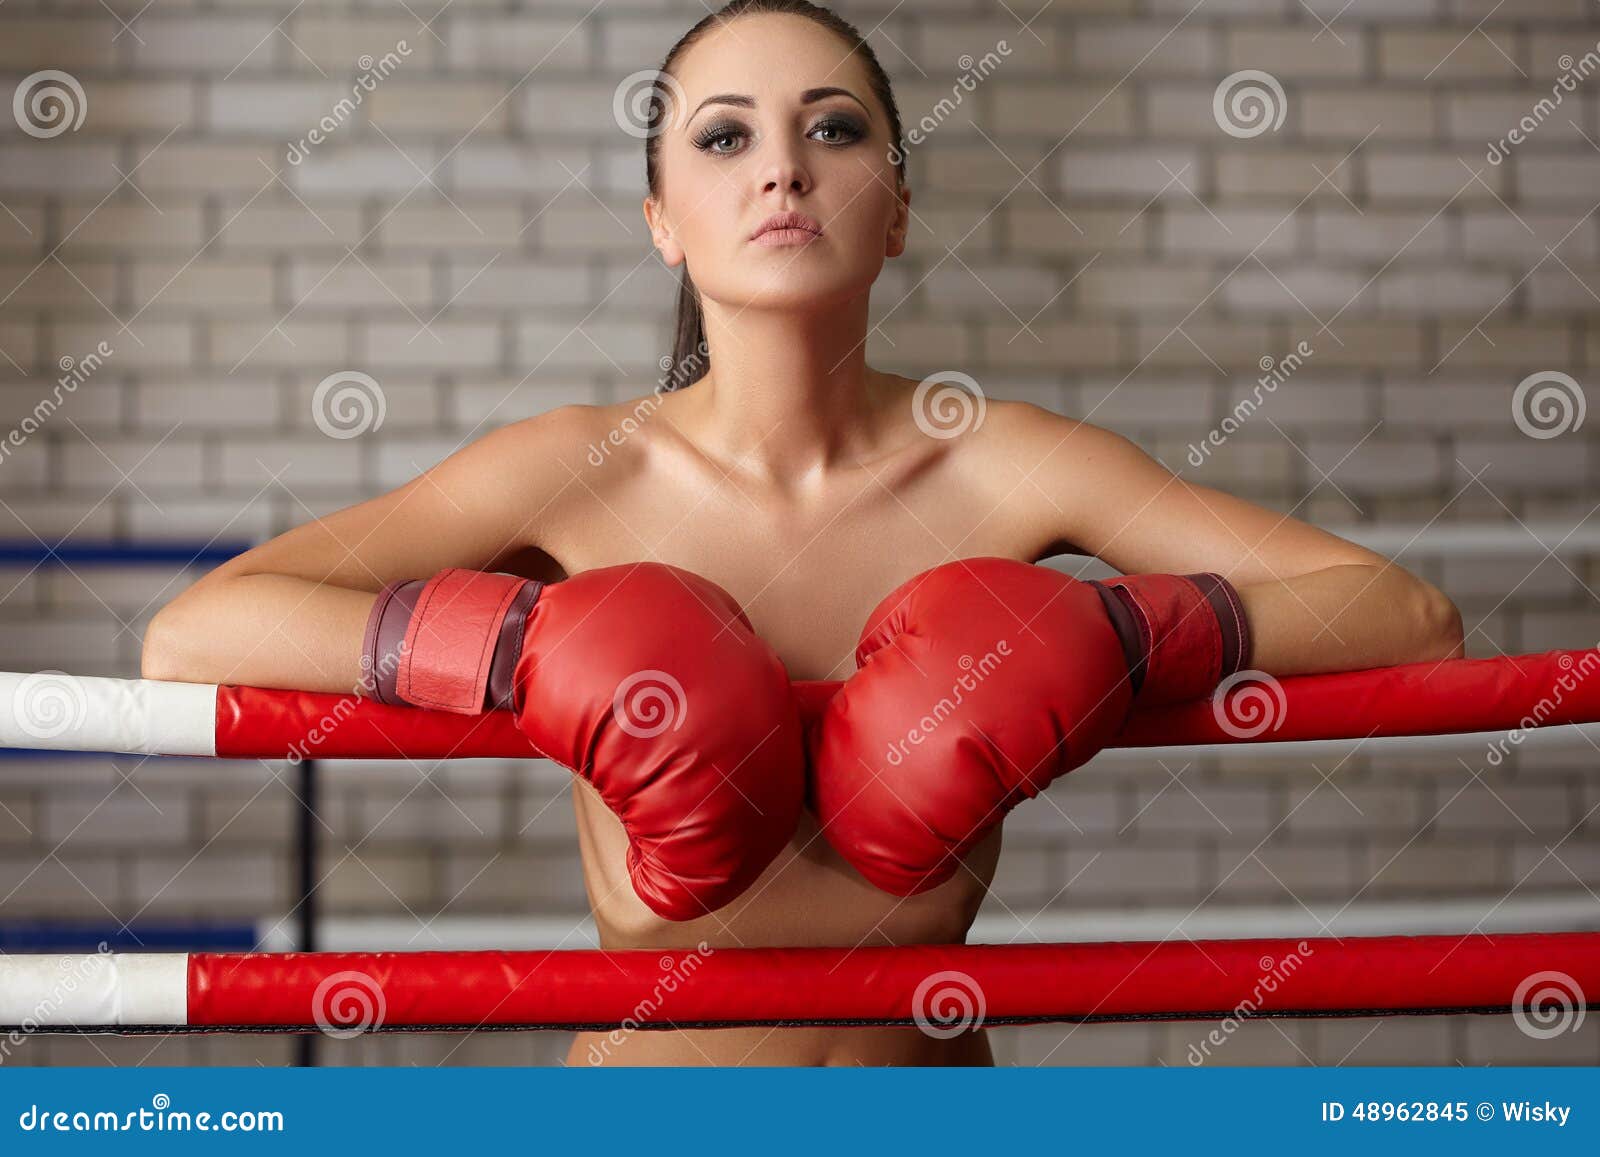 courtney hanner recommends naked female boxing pic